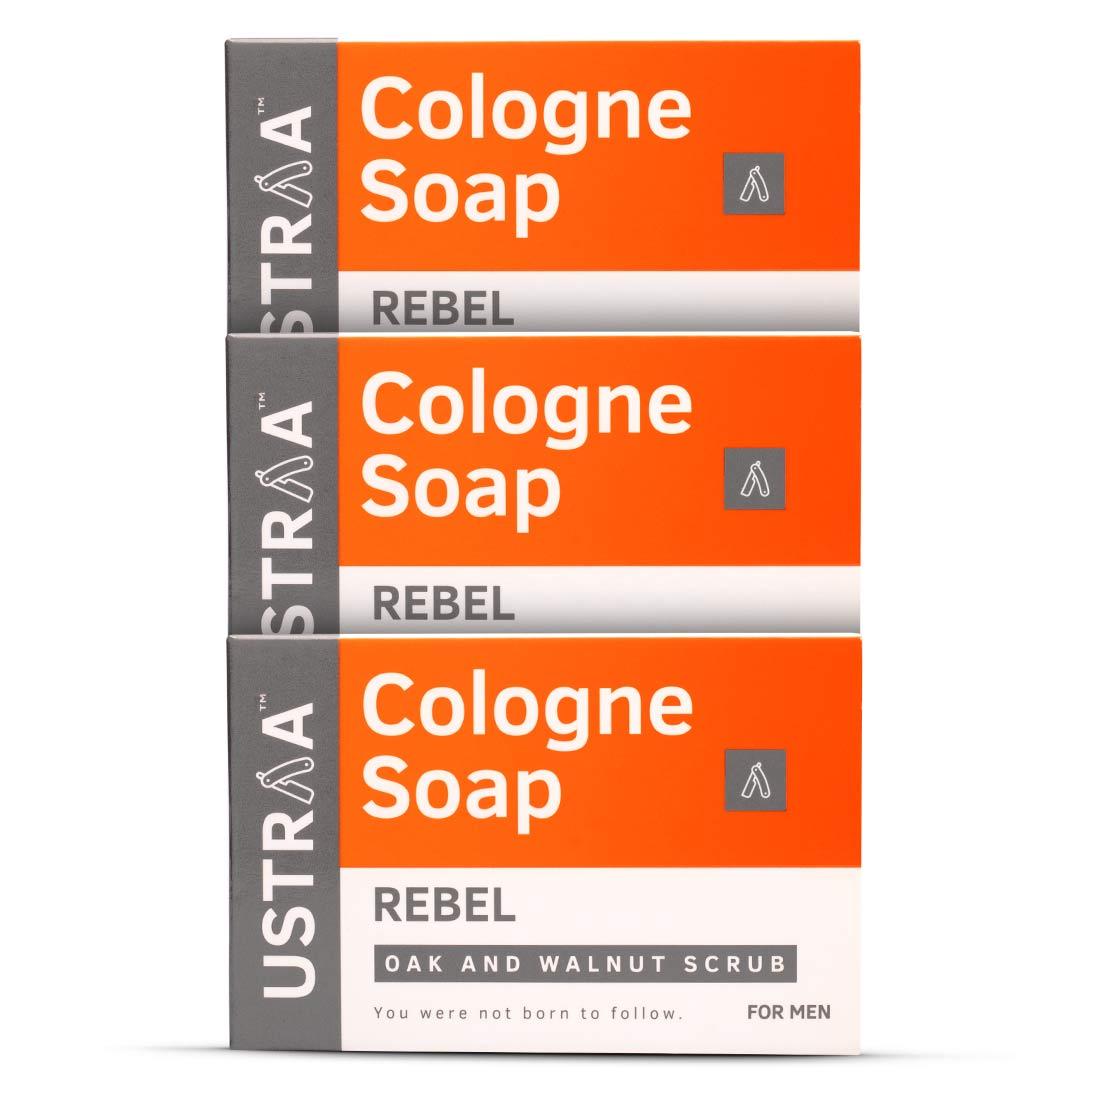 Ustraa Rebel Cologne Soap For Men (Pack of 3): With Walnut, Witch Hazel, and English Oak Extracts